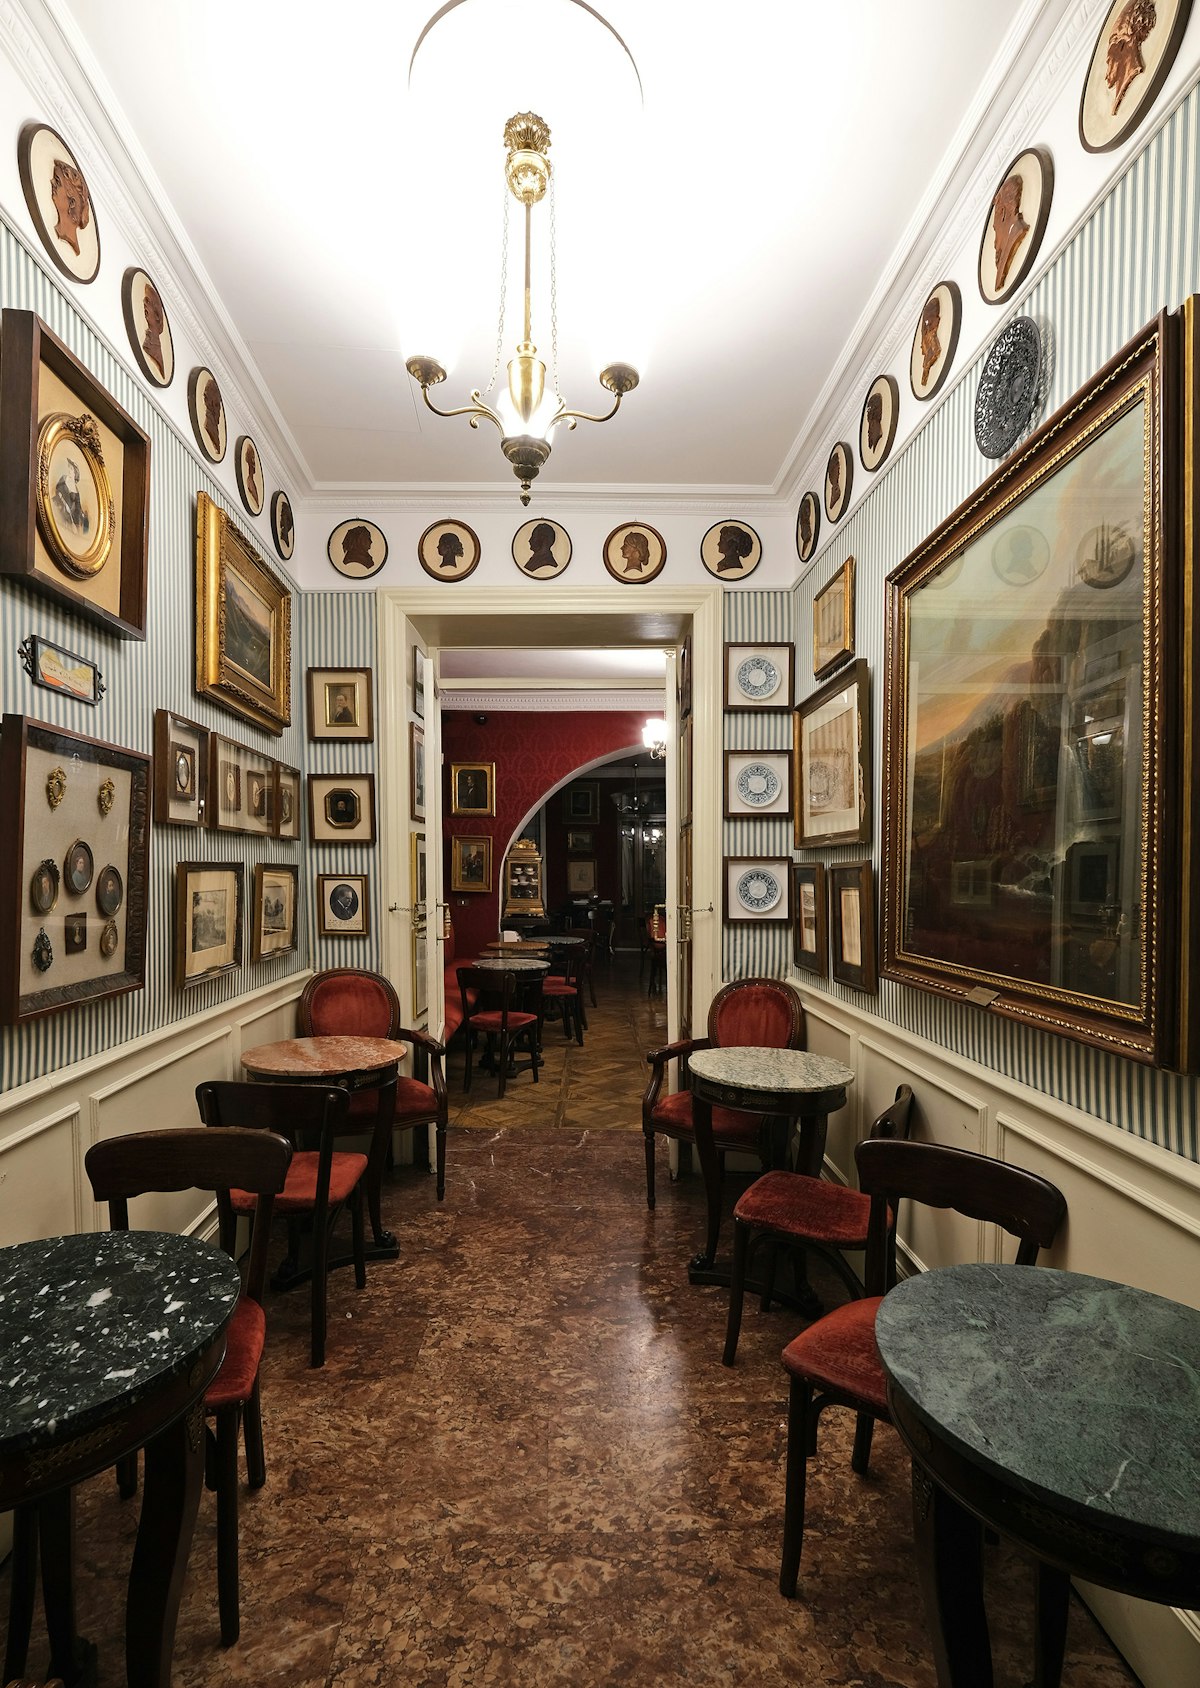 Rome, Antico Caffè Greco: Keats & Byron drank coffee at the marble tables of this celebrated, richly-ornate 18th-century cafe.